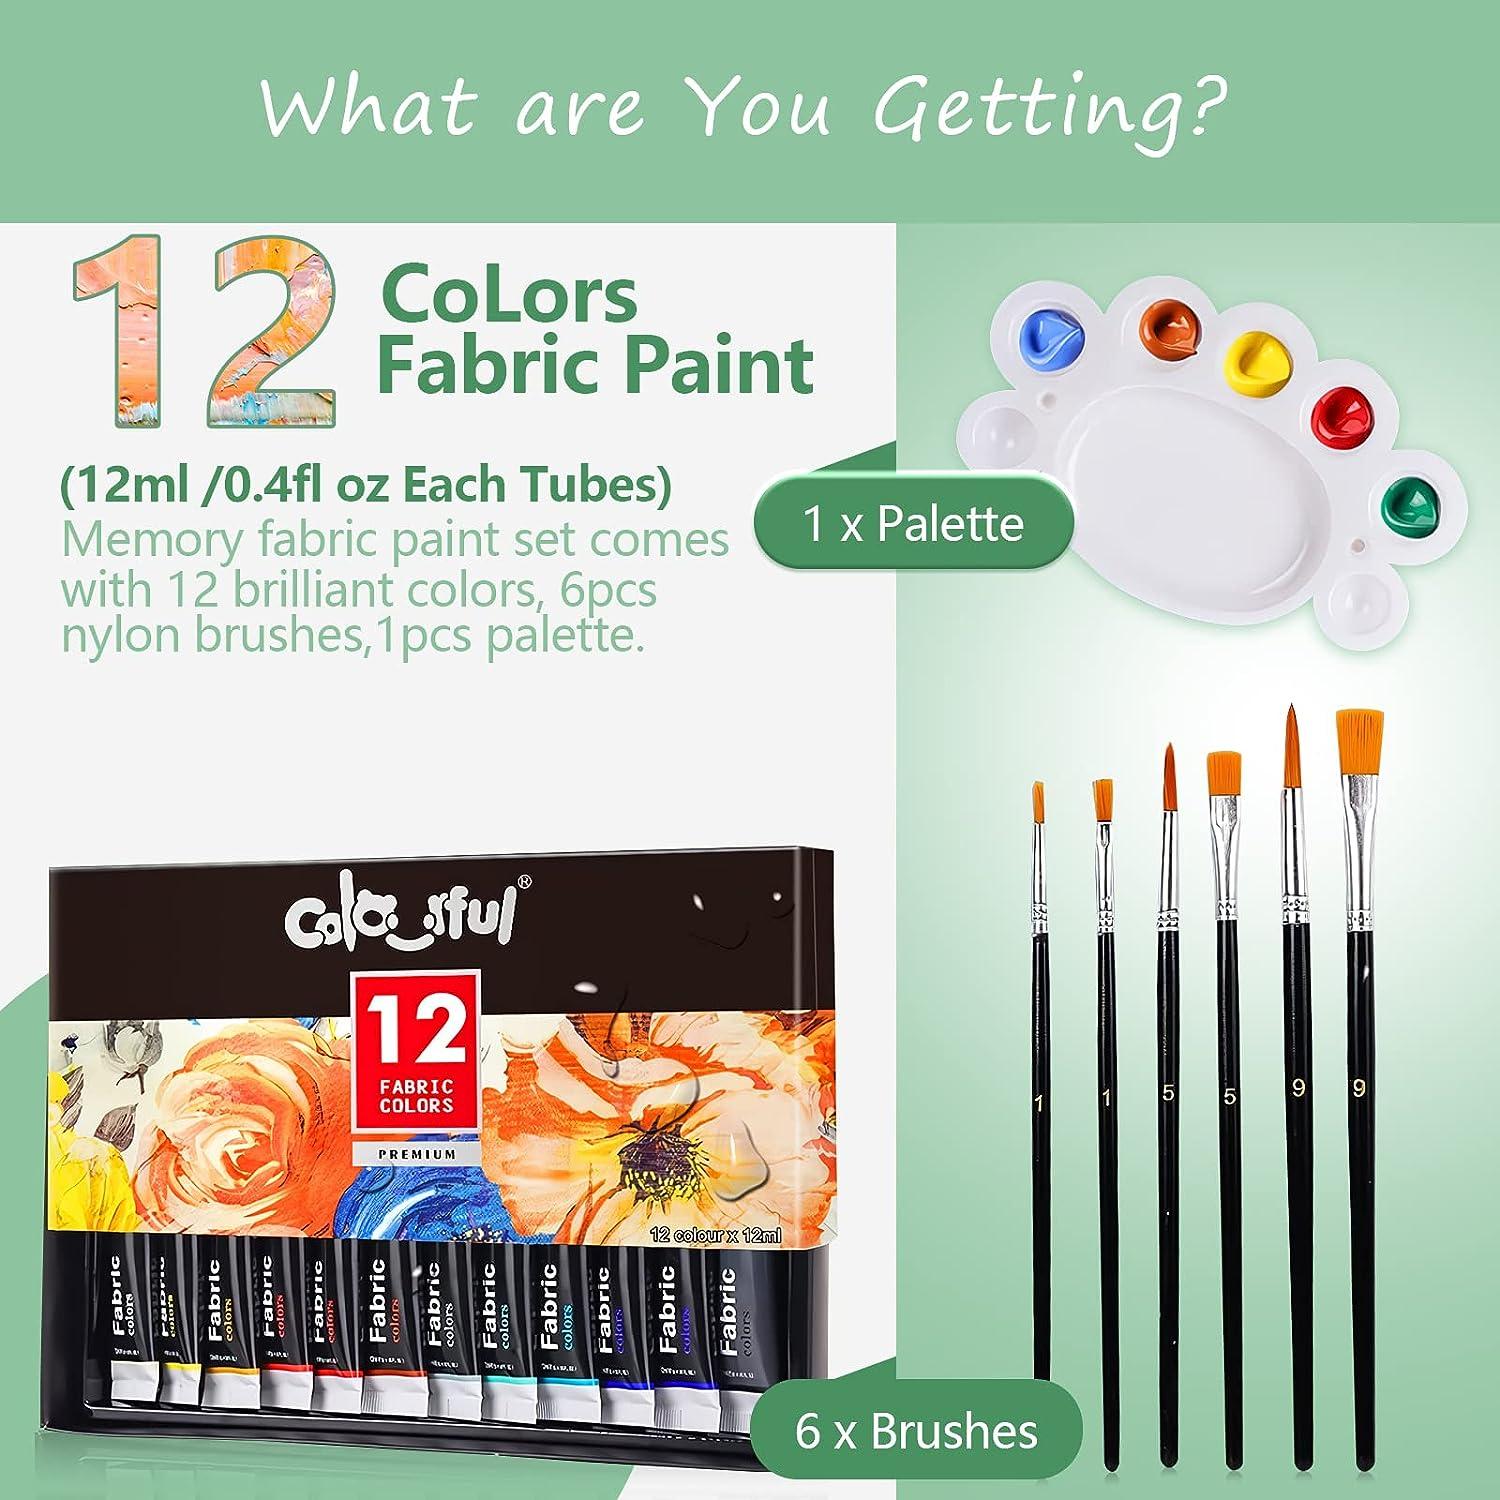 COLORFUL Fabric Paint Set for Clothes with 6 Brushes 1 Palette 12 Colors -  Permanent Textile Paint Puffy Paint Kit for Shoes Canvas - Non-Toxic Slick Painting  Set for Adults Beginner & Artists 12 Tubes Color